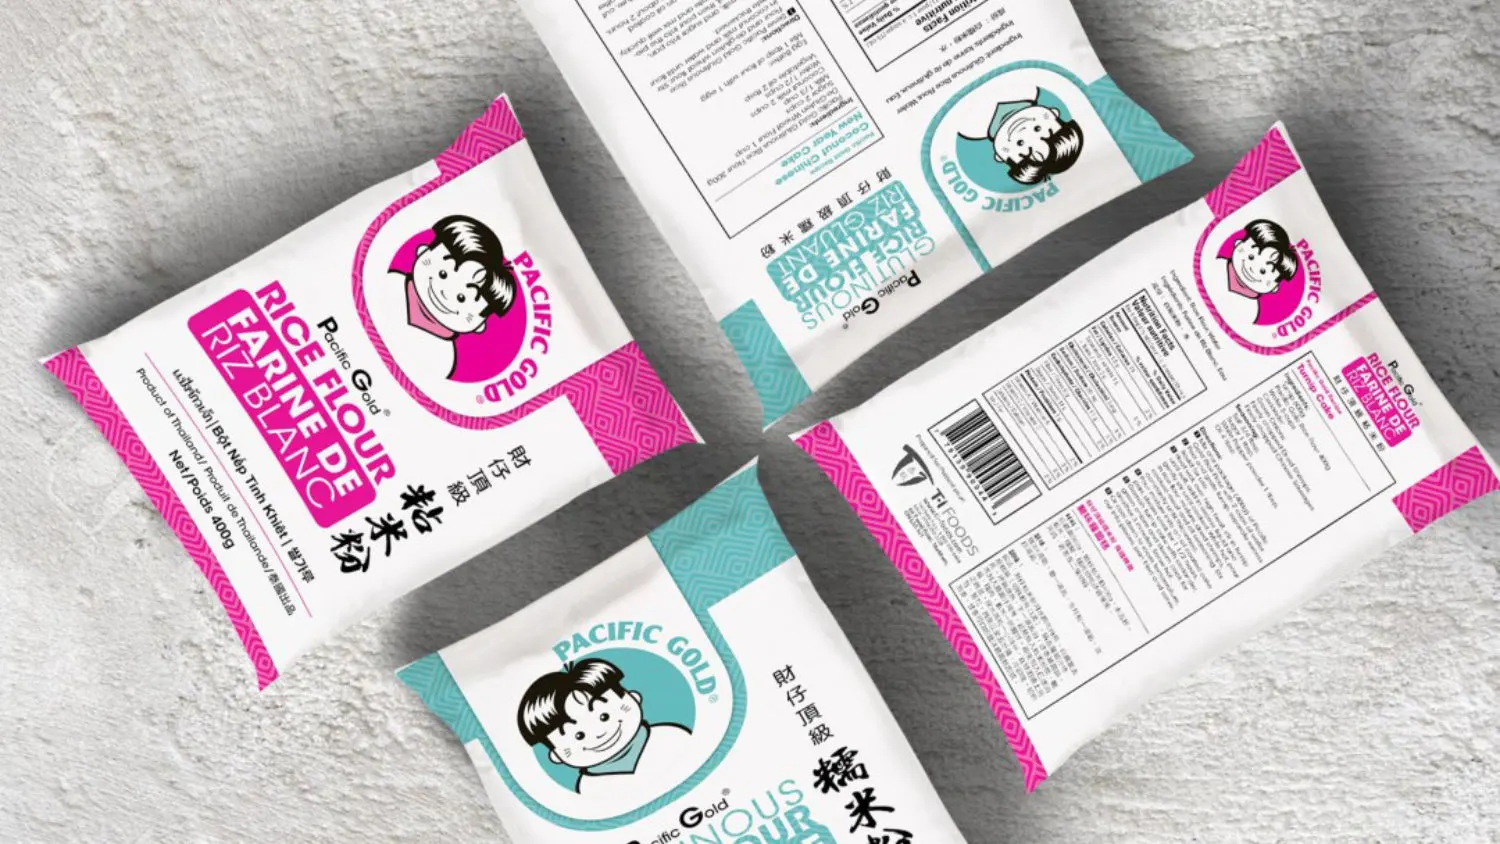 Graphic design project for TI Foods 泰聯貿易. Designed product shootings